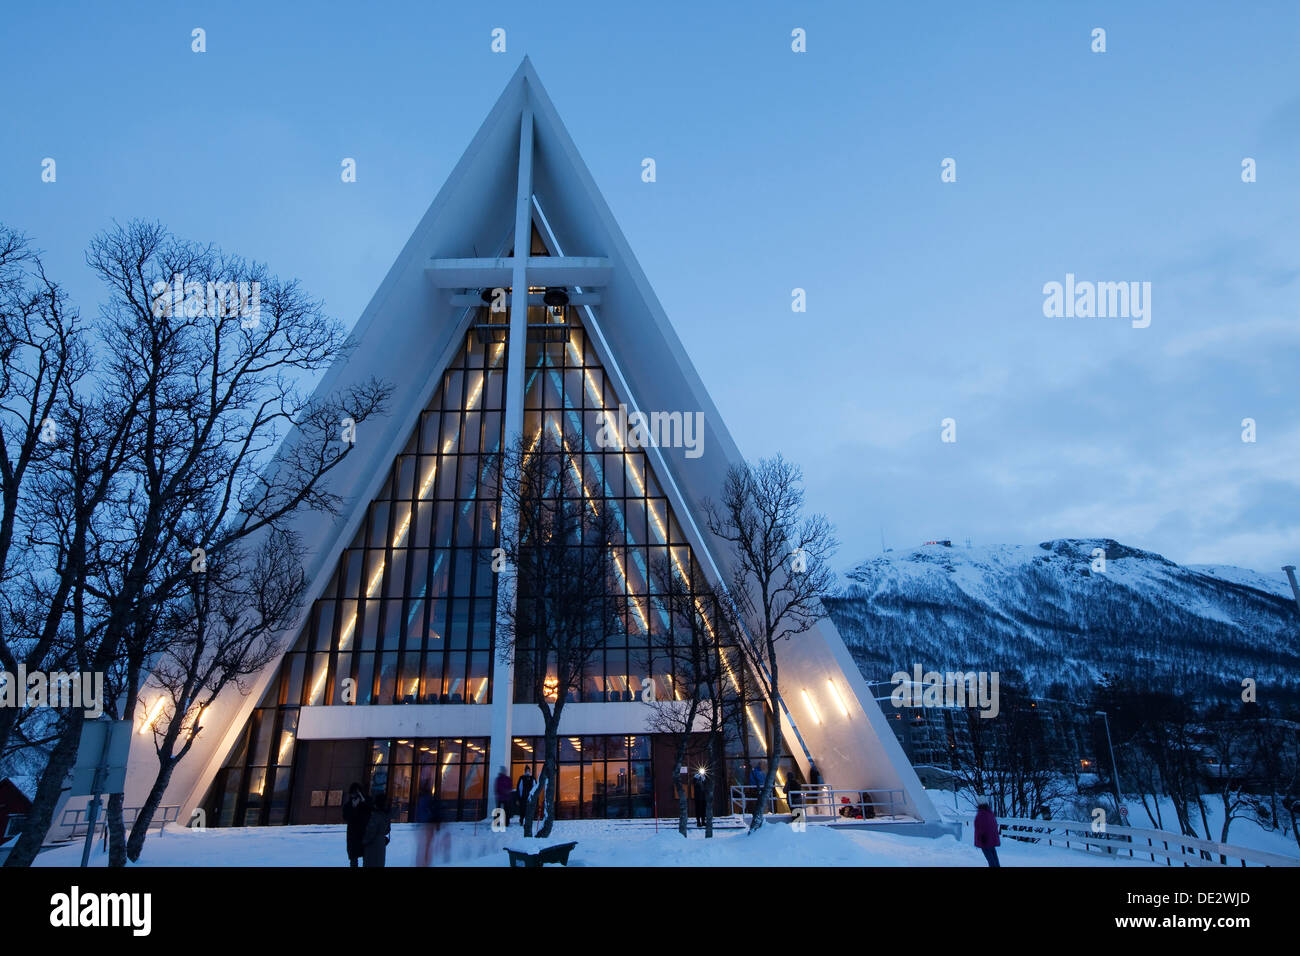 Arctic Cathedral or Tromsdalen Kirke church, in winter, Tromso, Norway, Europe Stock Photo